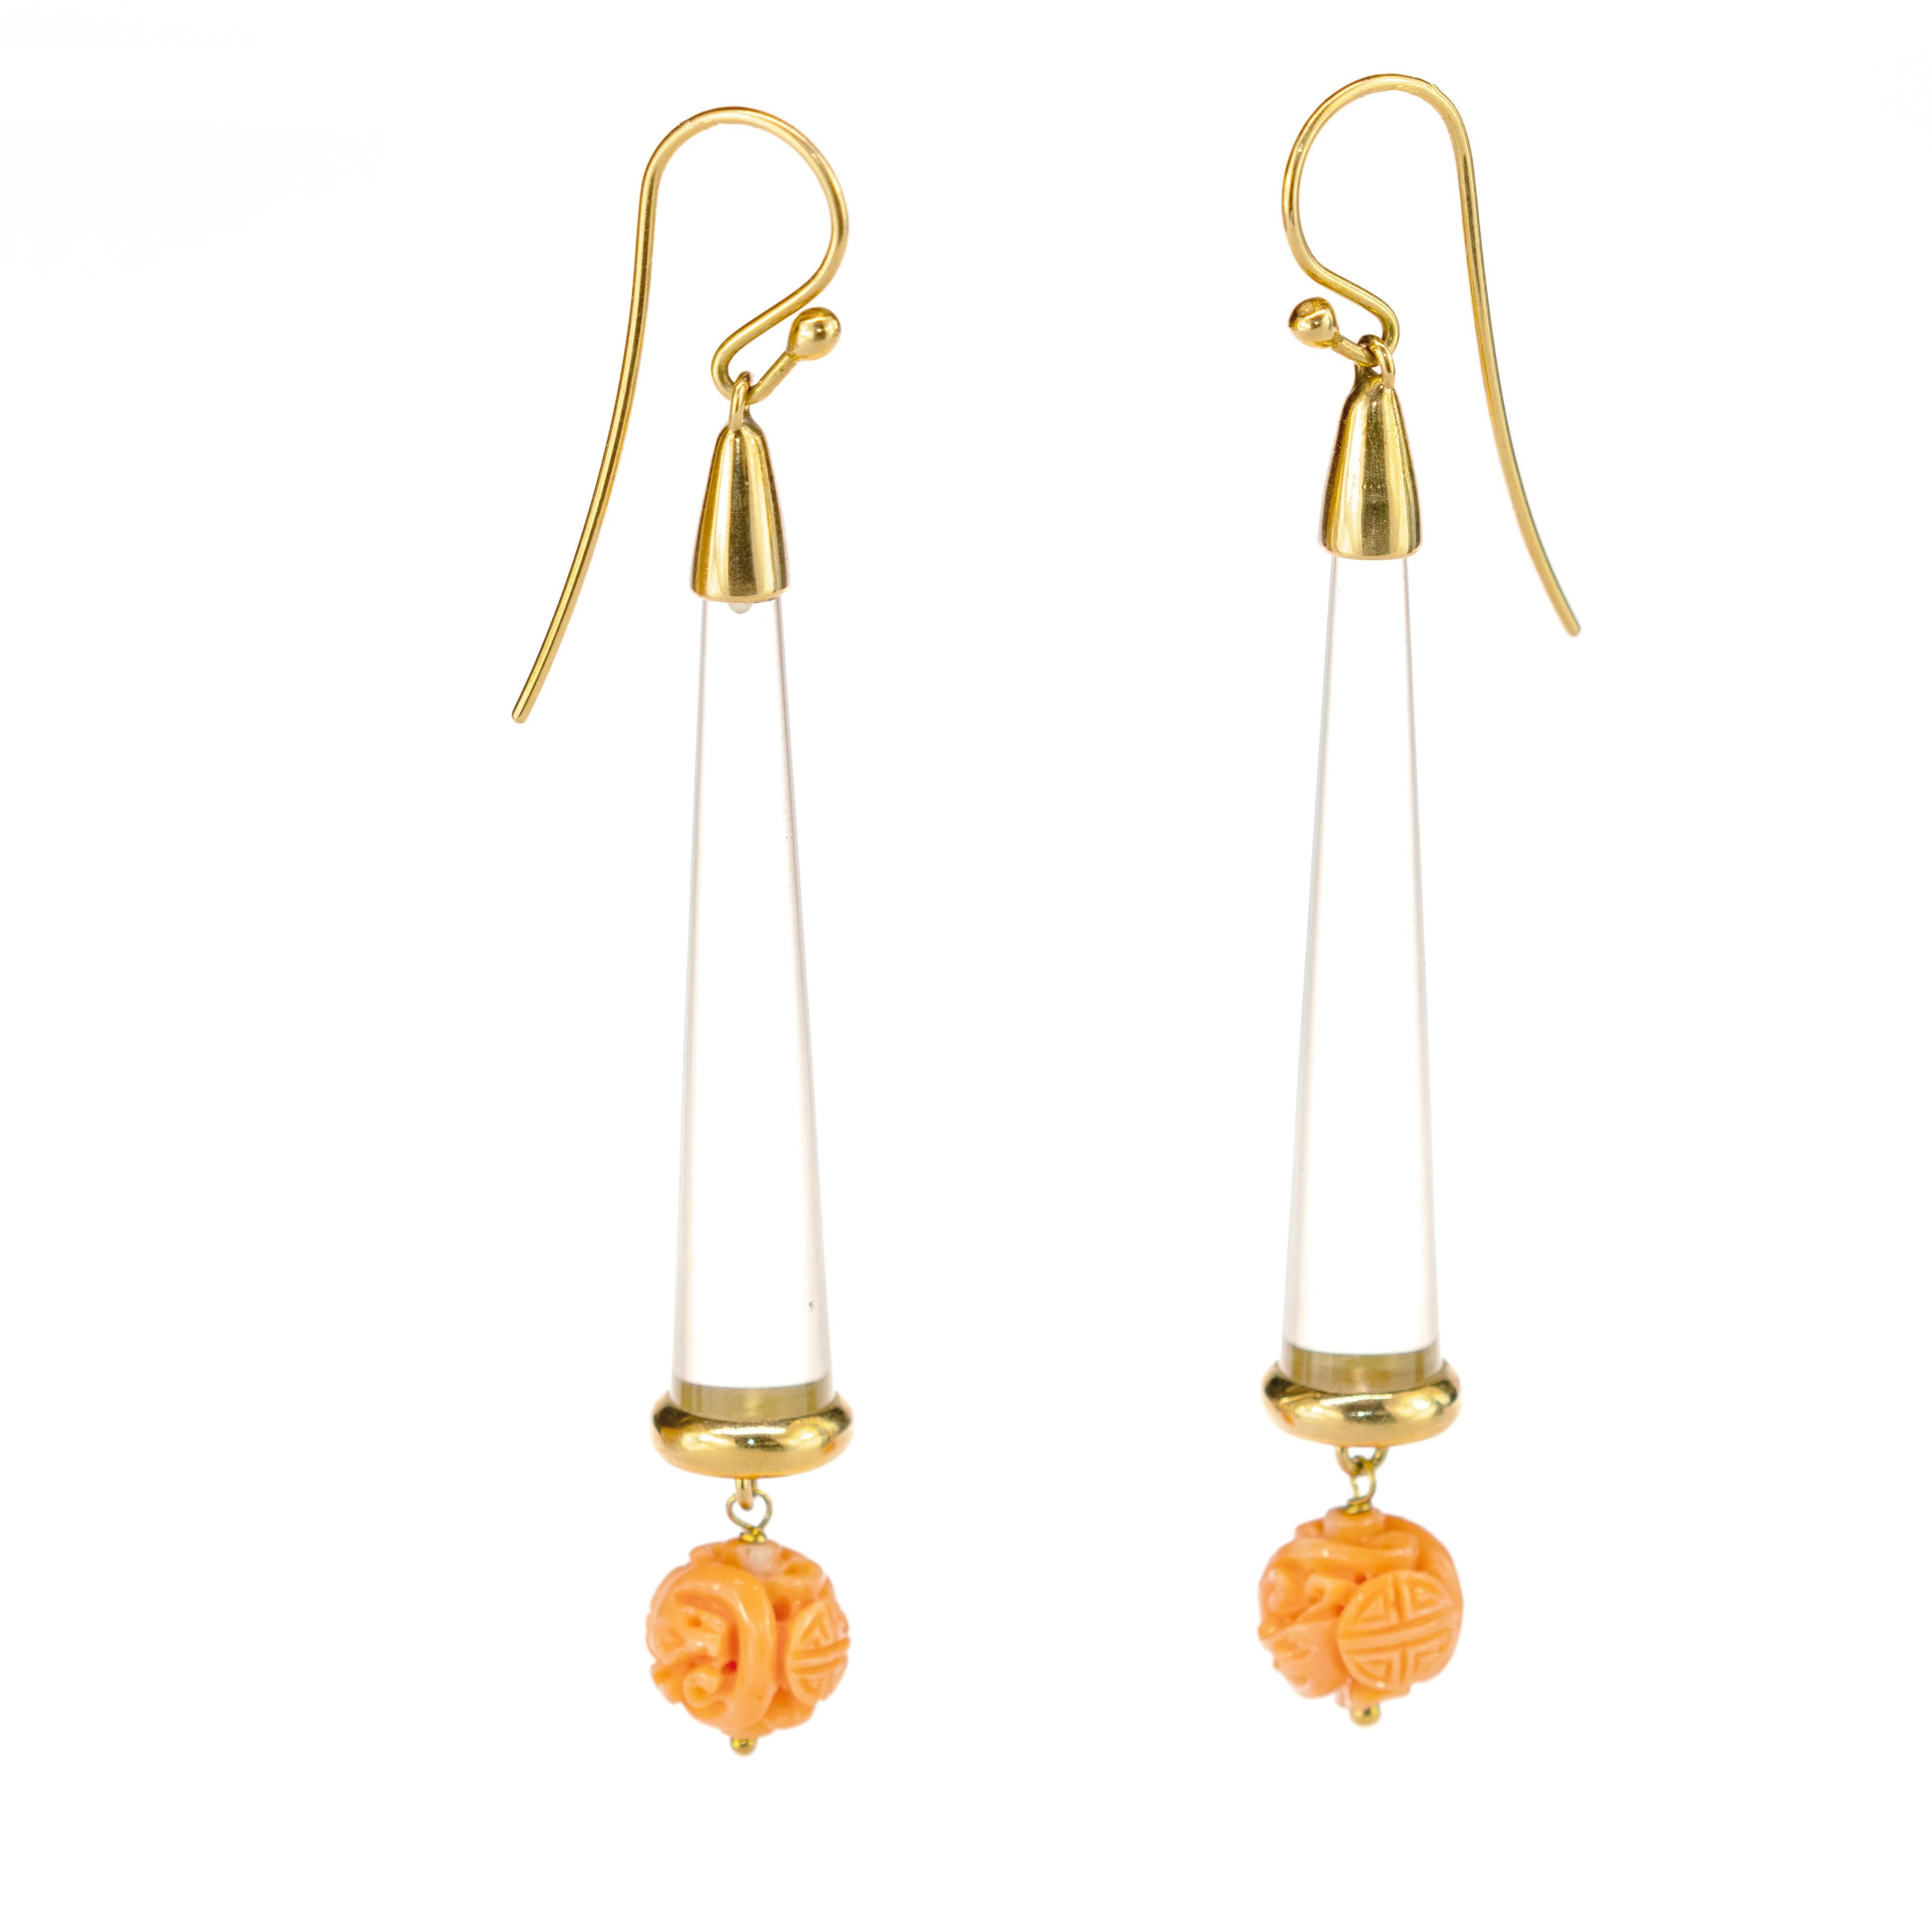 Marvelous and skilful earrings. A very impressive and unique design that starts with two beautiful half circular spheres made of 18 k yellow gold and growth like a storm in long triangular cylinders that evoke glamour in a jewelry piece. The